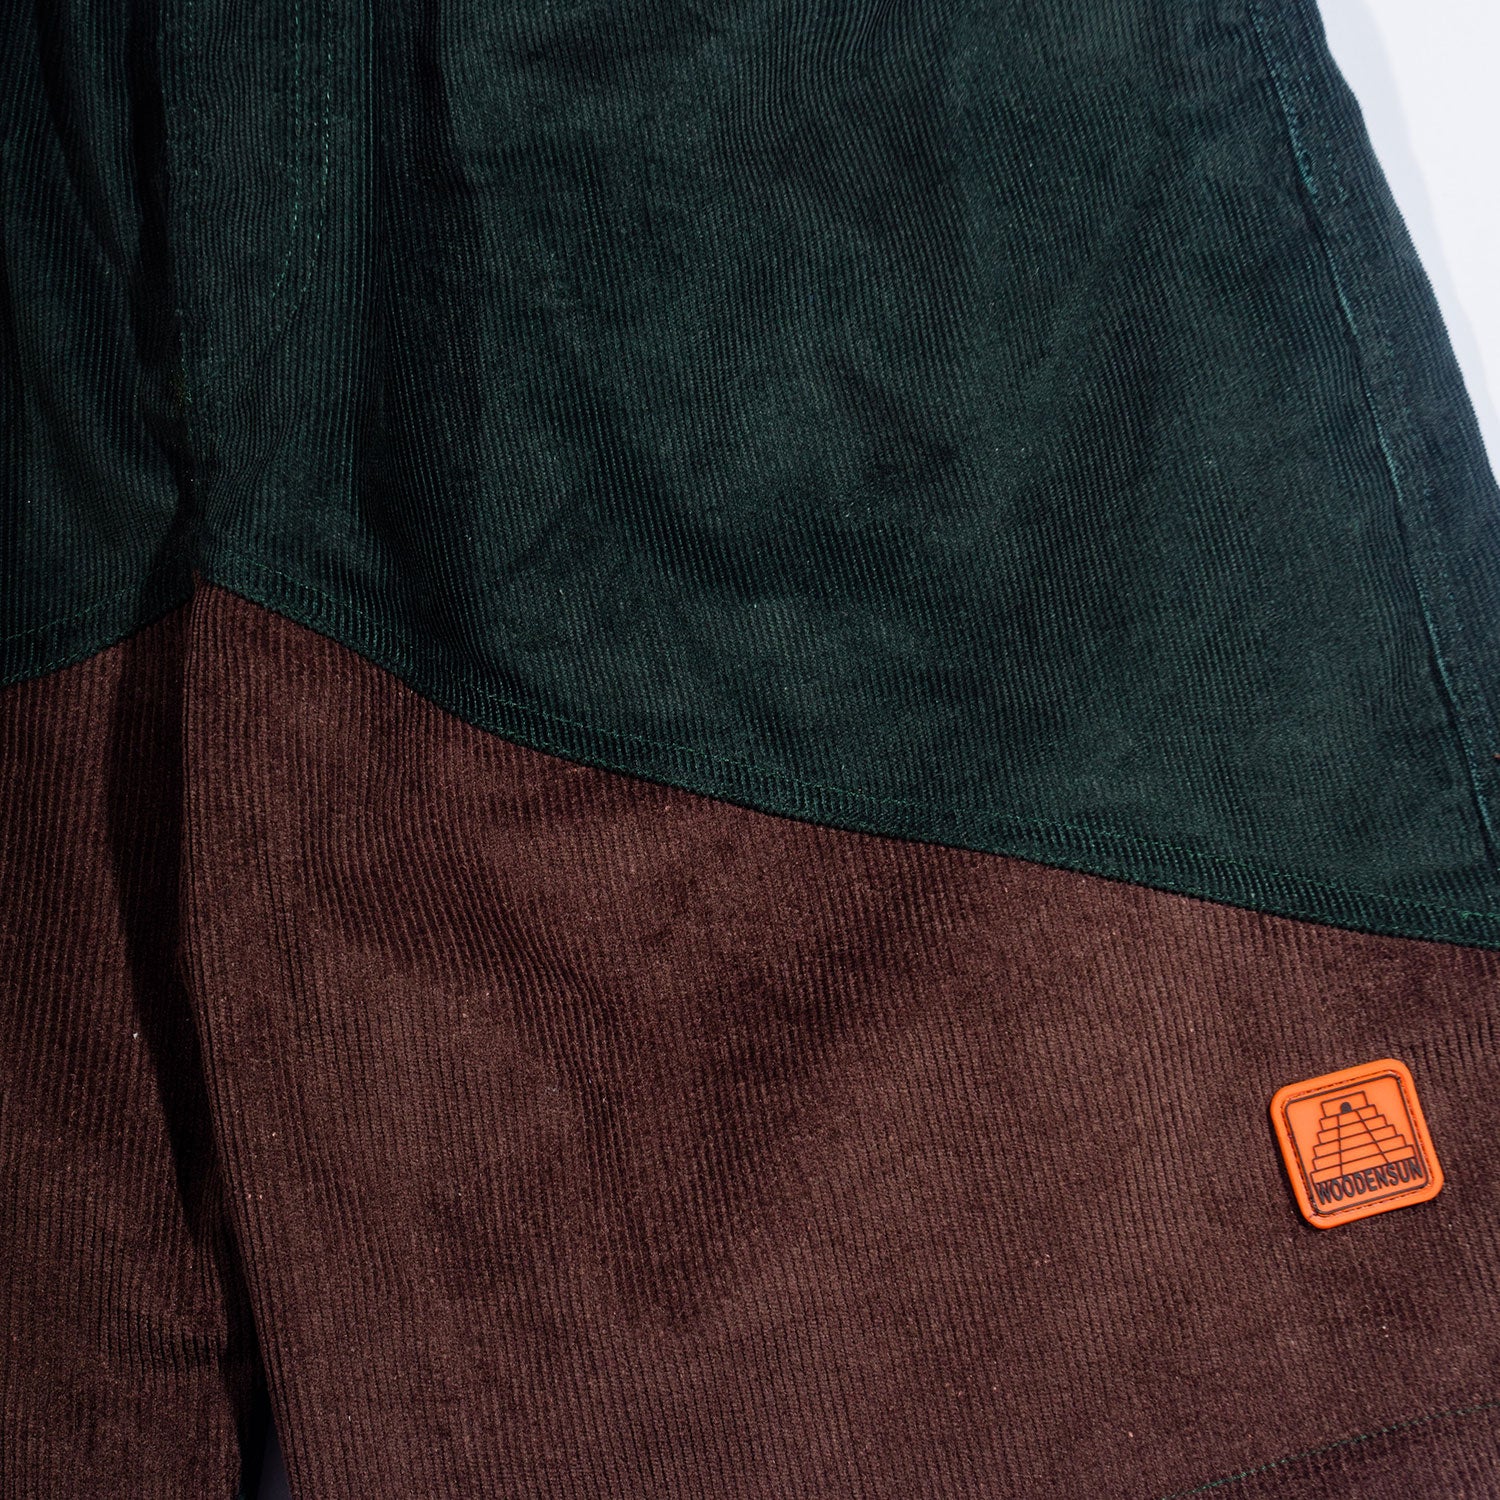 Cultist Green Brown - Shorts